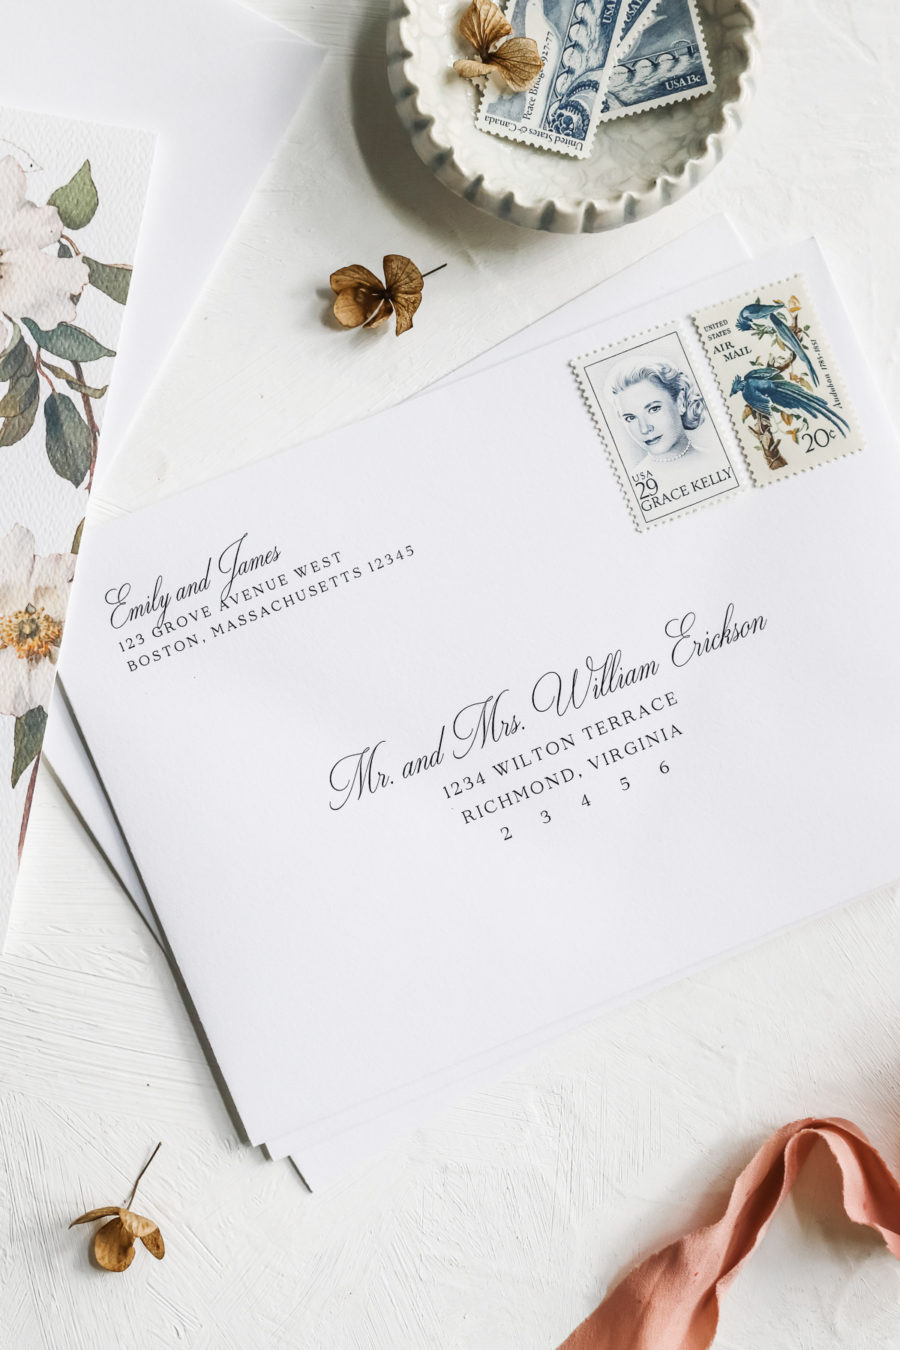 How to Make an Envelope Template (or Snag Ours for Free)